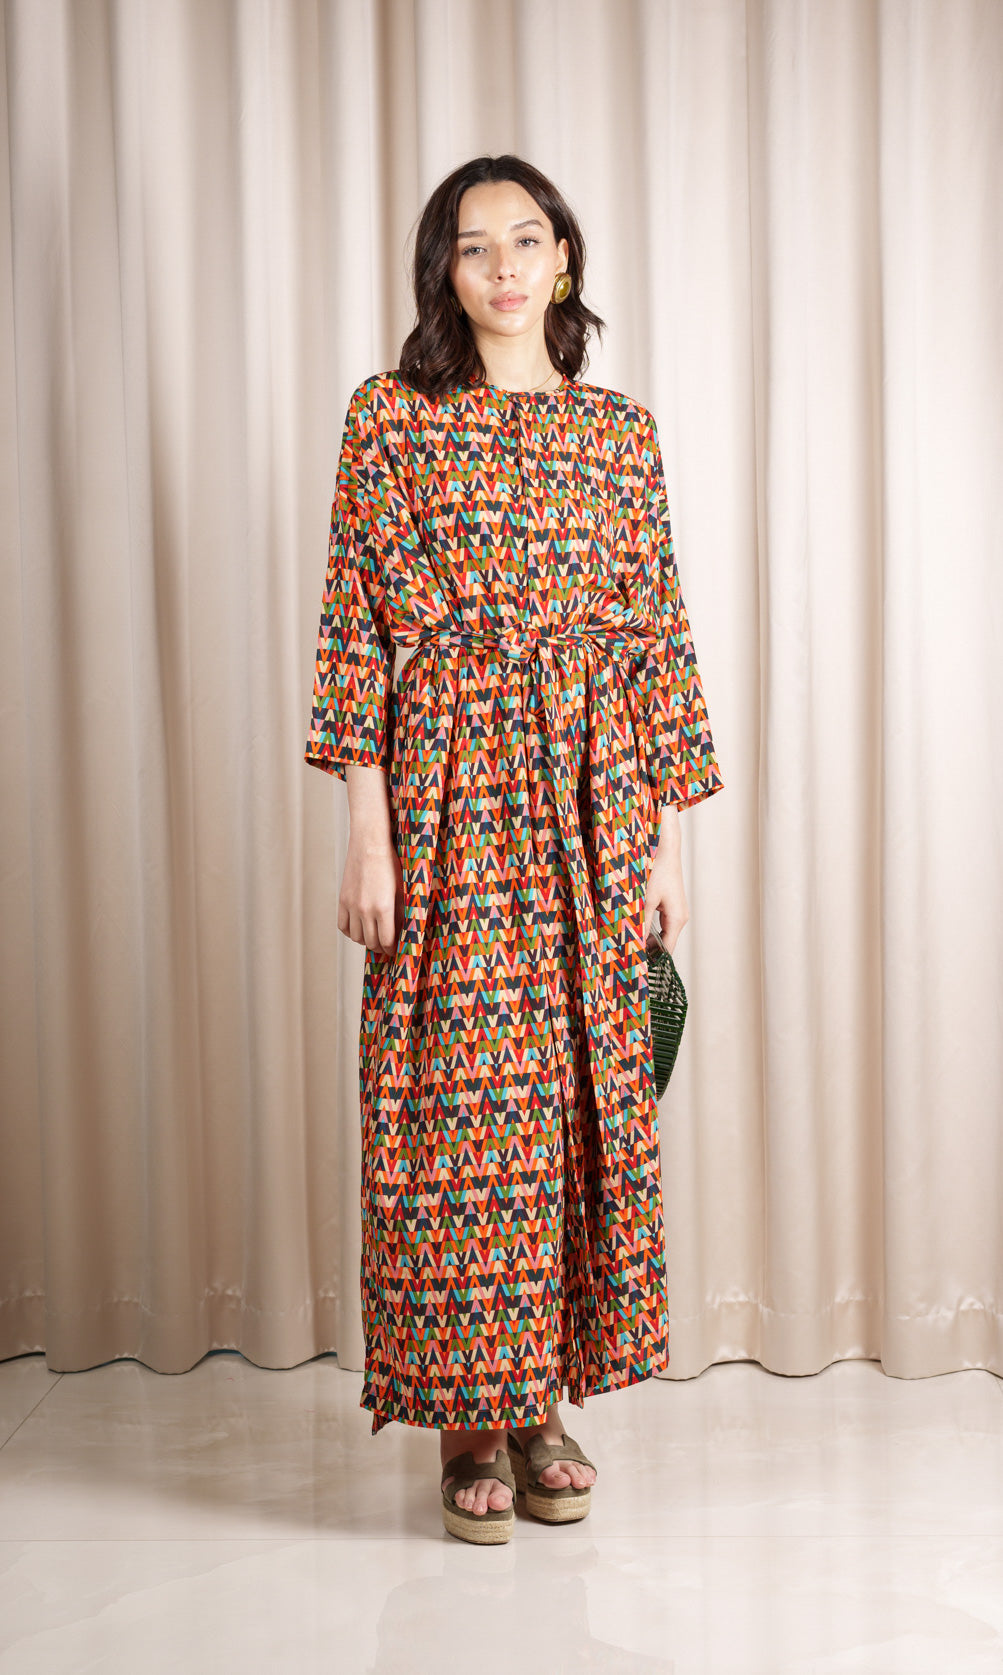 Model wears silk crepe blend dress featuring an exquisite multi-coloured print